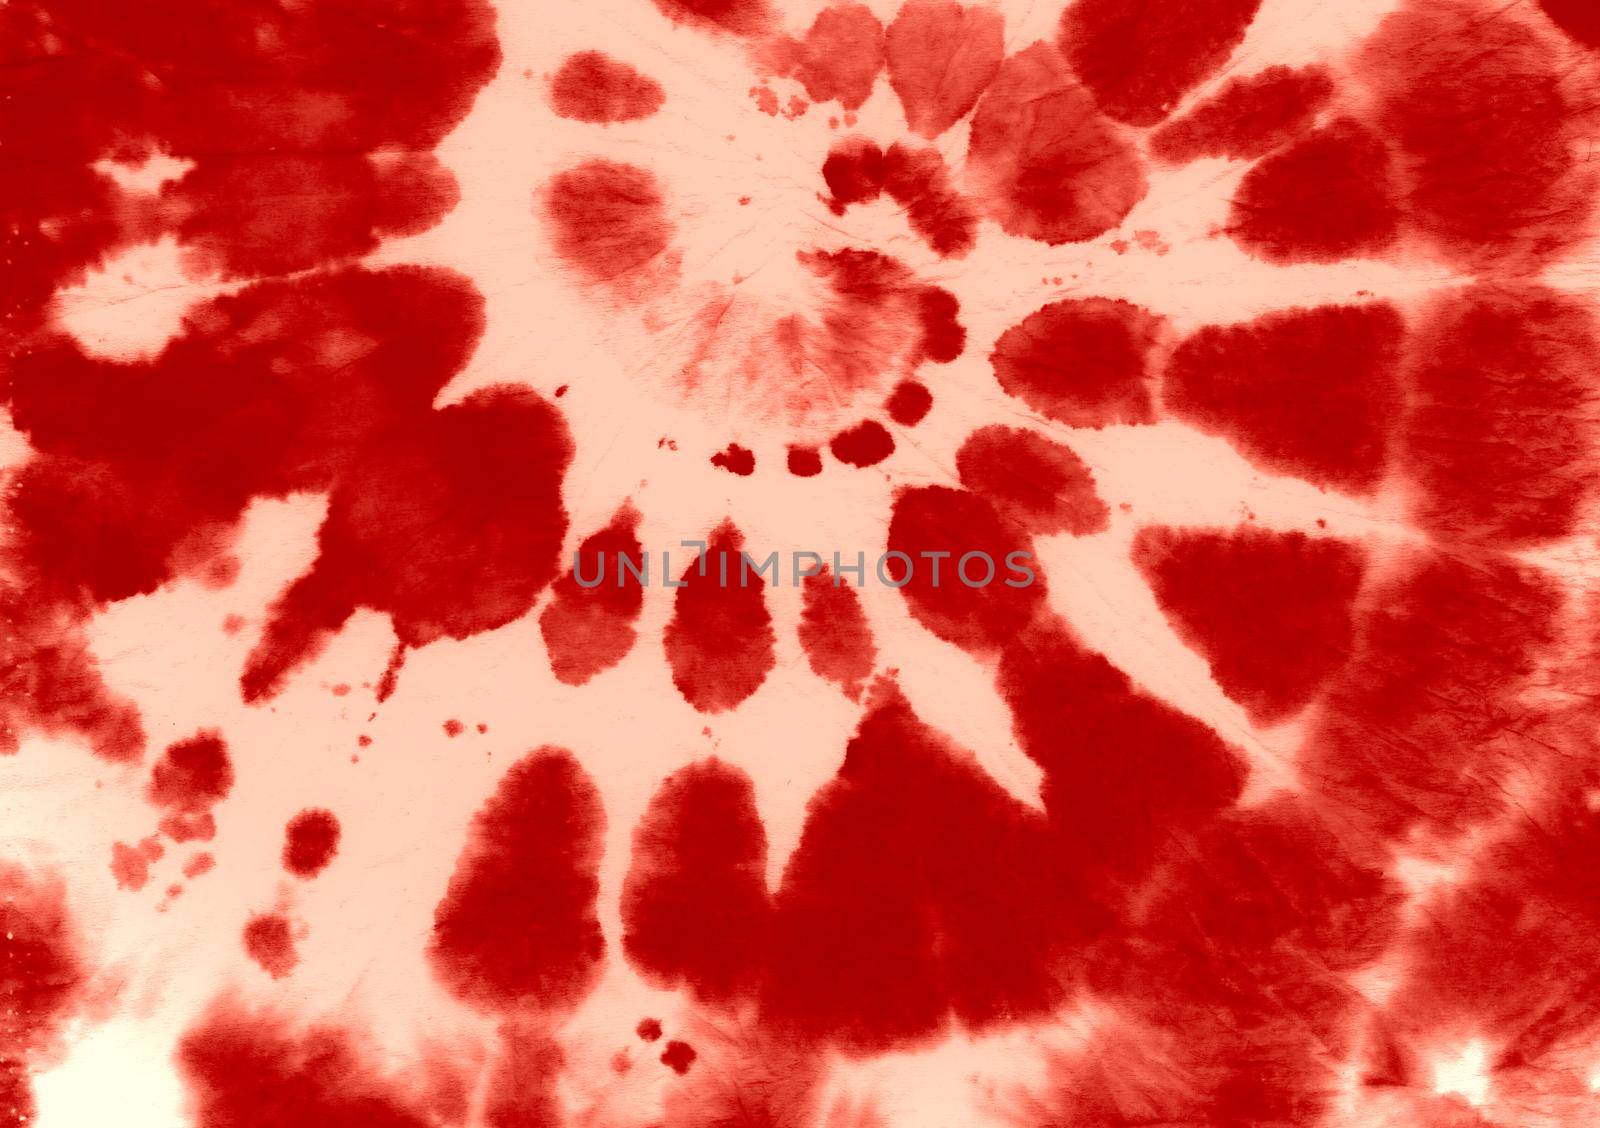 Red Dyeing Pattern. Spiral Water Dress. Artistic Grunge Kaleidoscope. Color Fabric. Tye Dye Swirl Painting. Abstract Art Background. Batik Shirt. Psychedelic Multi Texture. Red Dyeing Pattern.